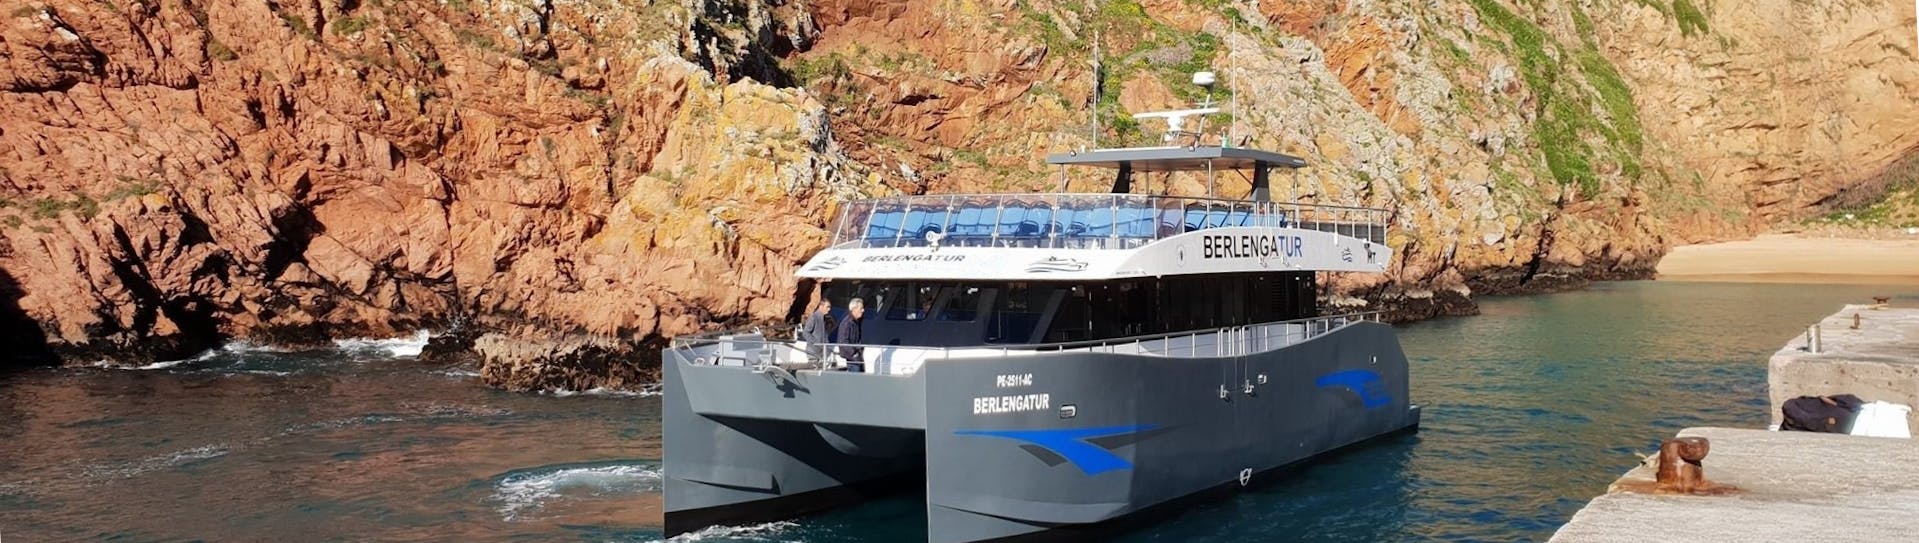 View of our boat during the Boat Trip to the Berlenga Island from Peniche with Berlengatur Peniche.